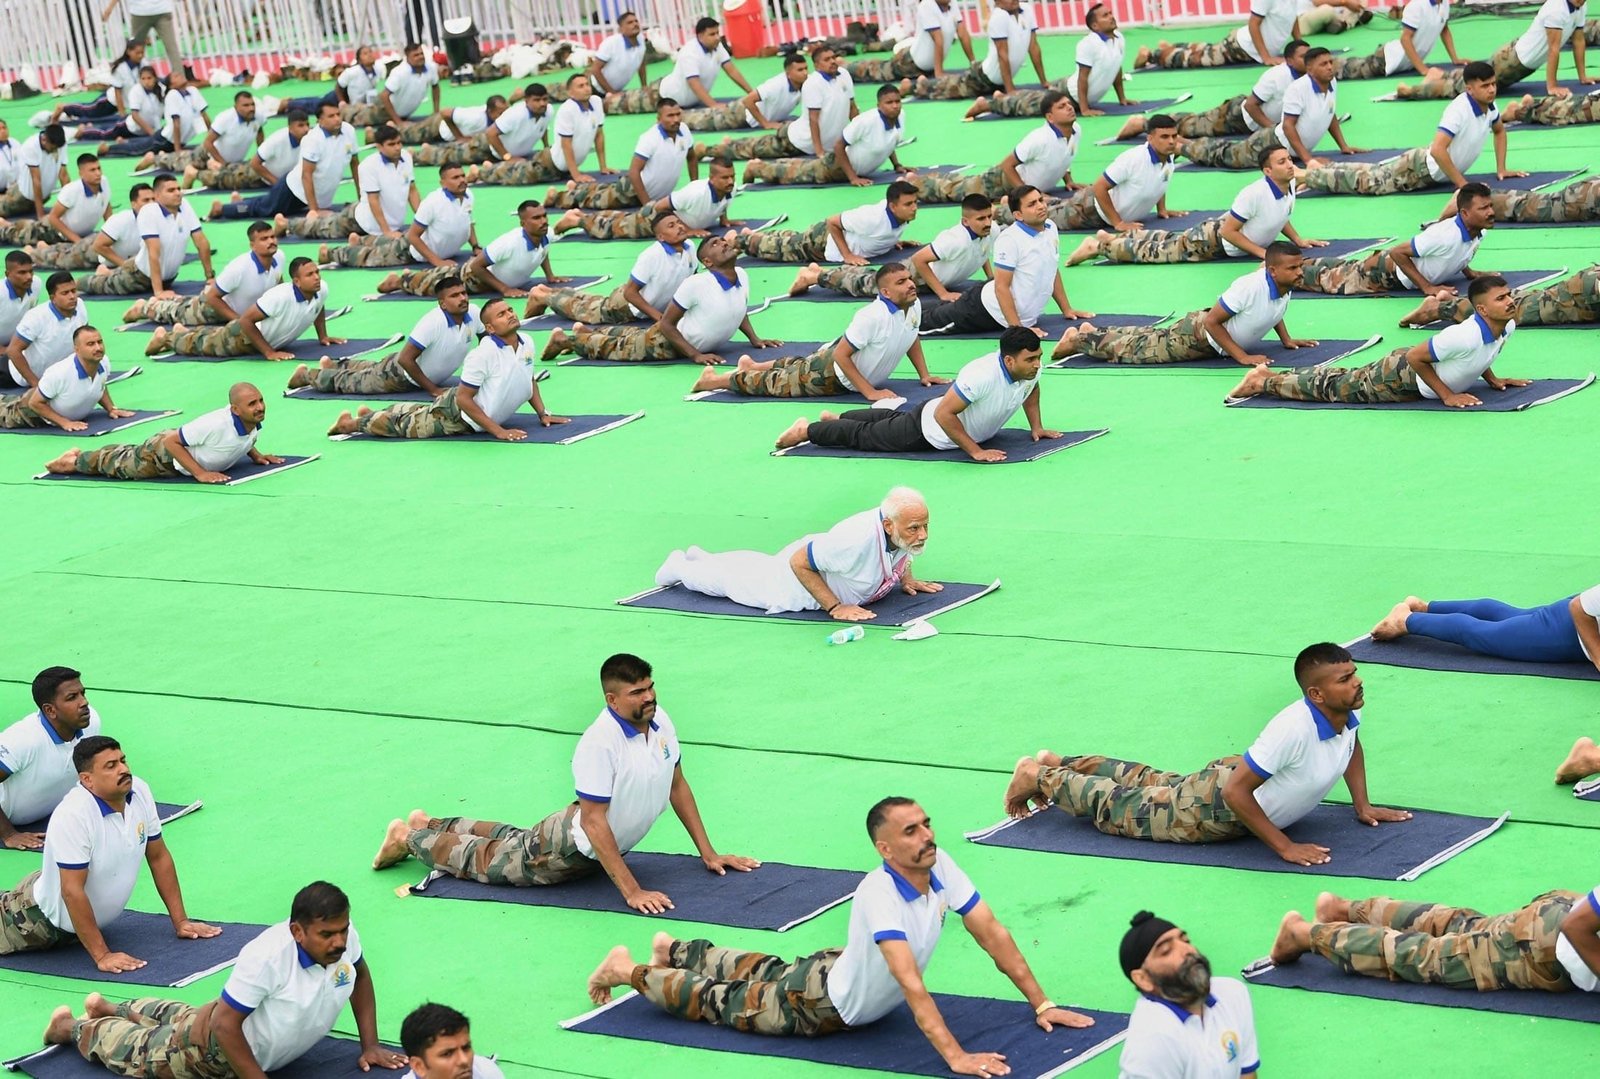 On the occasion of International Day of Yoga, PM leads Mass Yoga Demonstration at Ranchi